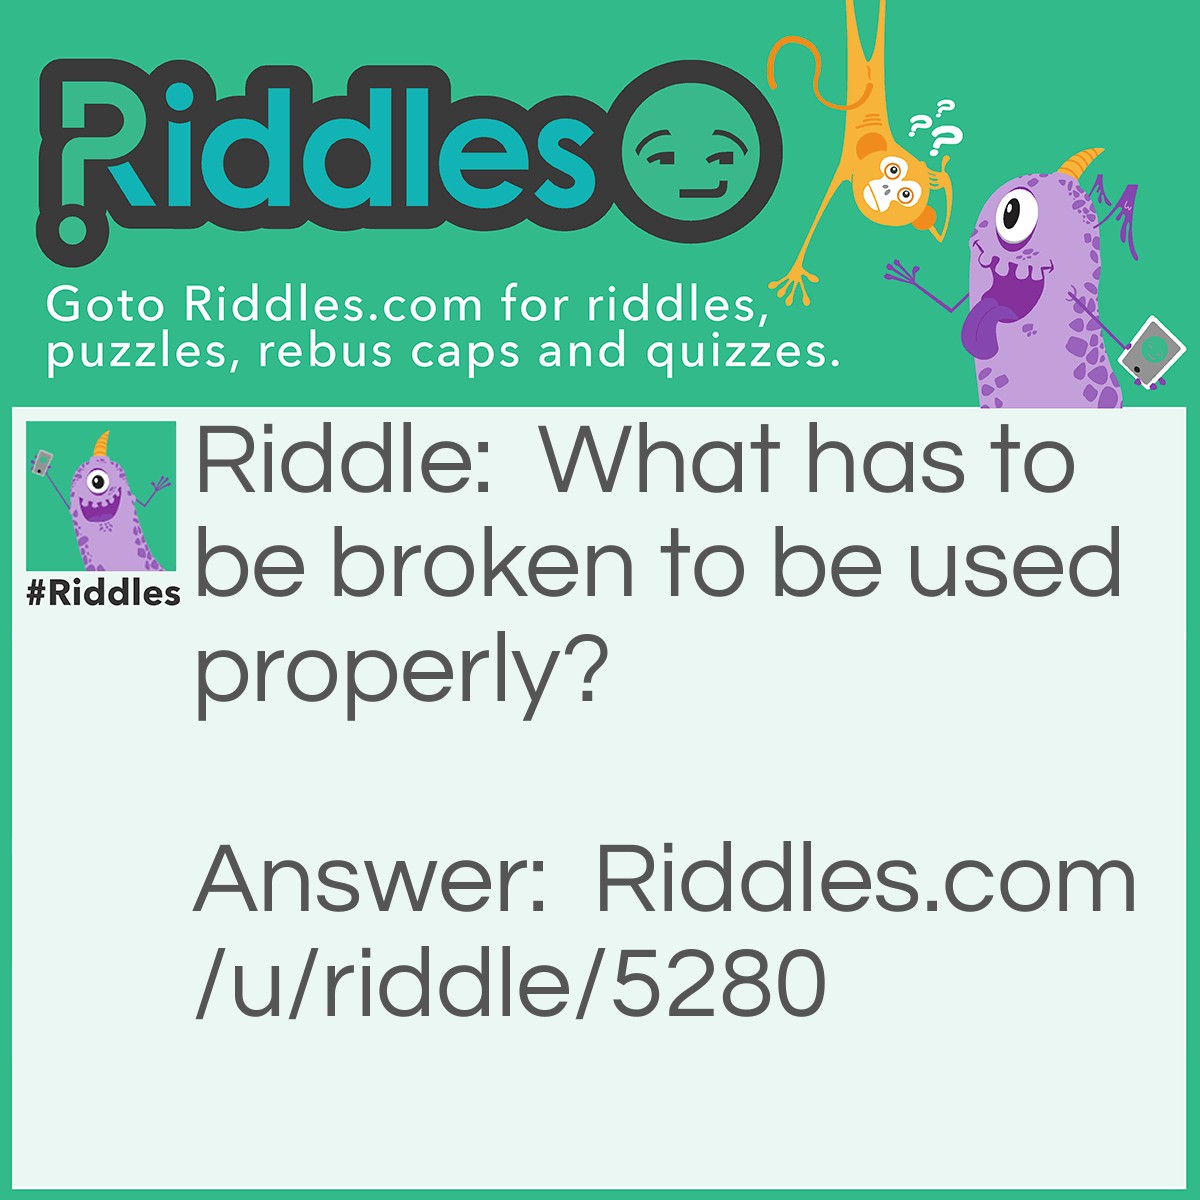 Riddle: What has to be broken to be used properly? Answer: An egg!